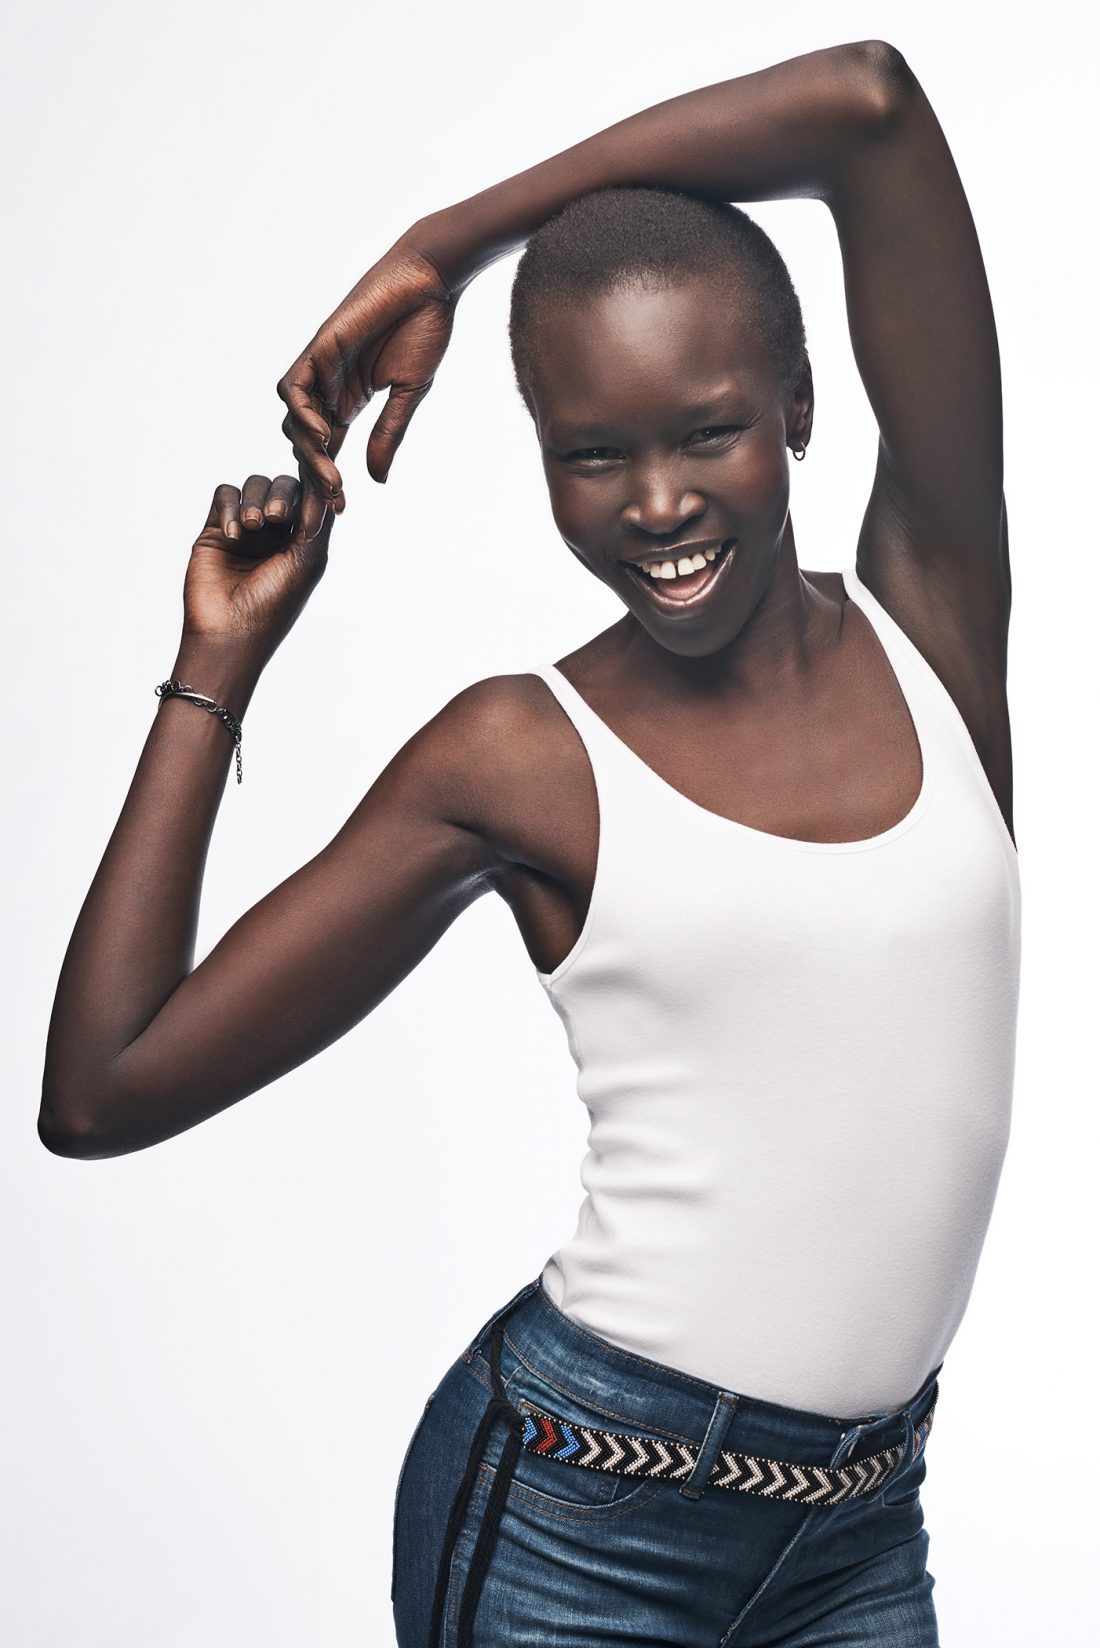 Edward Enninful makes directorial debut in new Gap ad